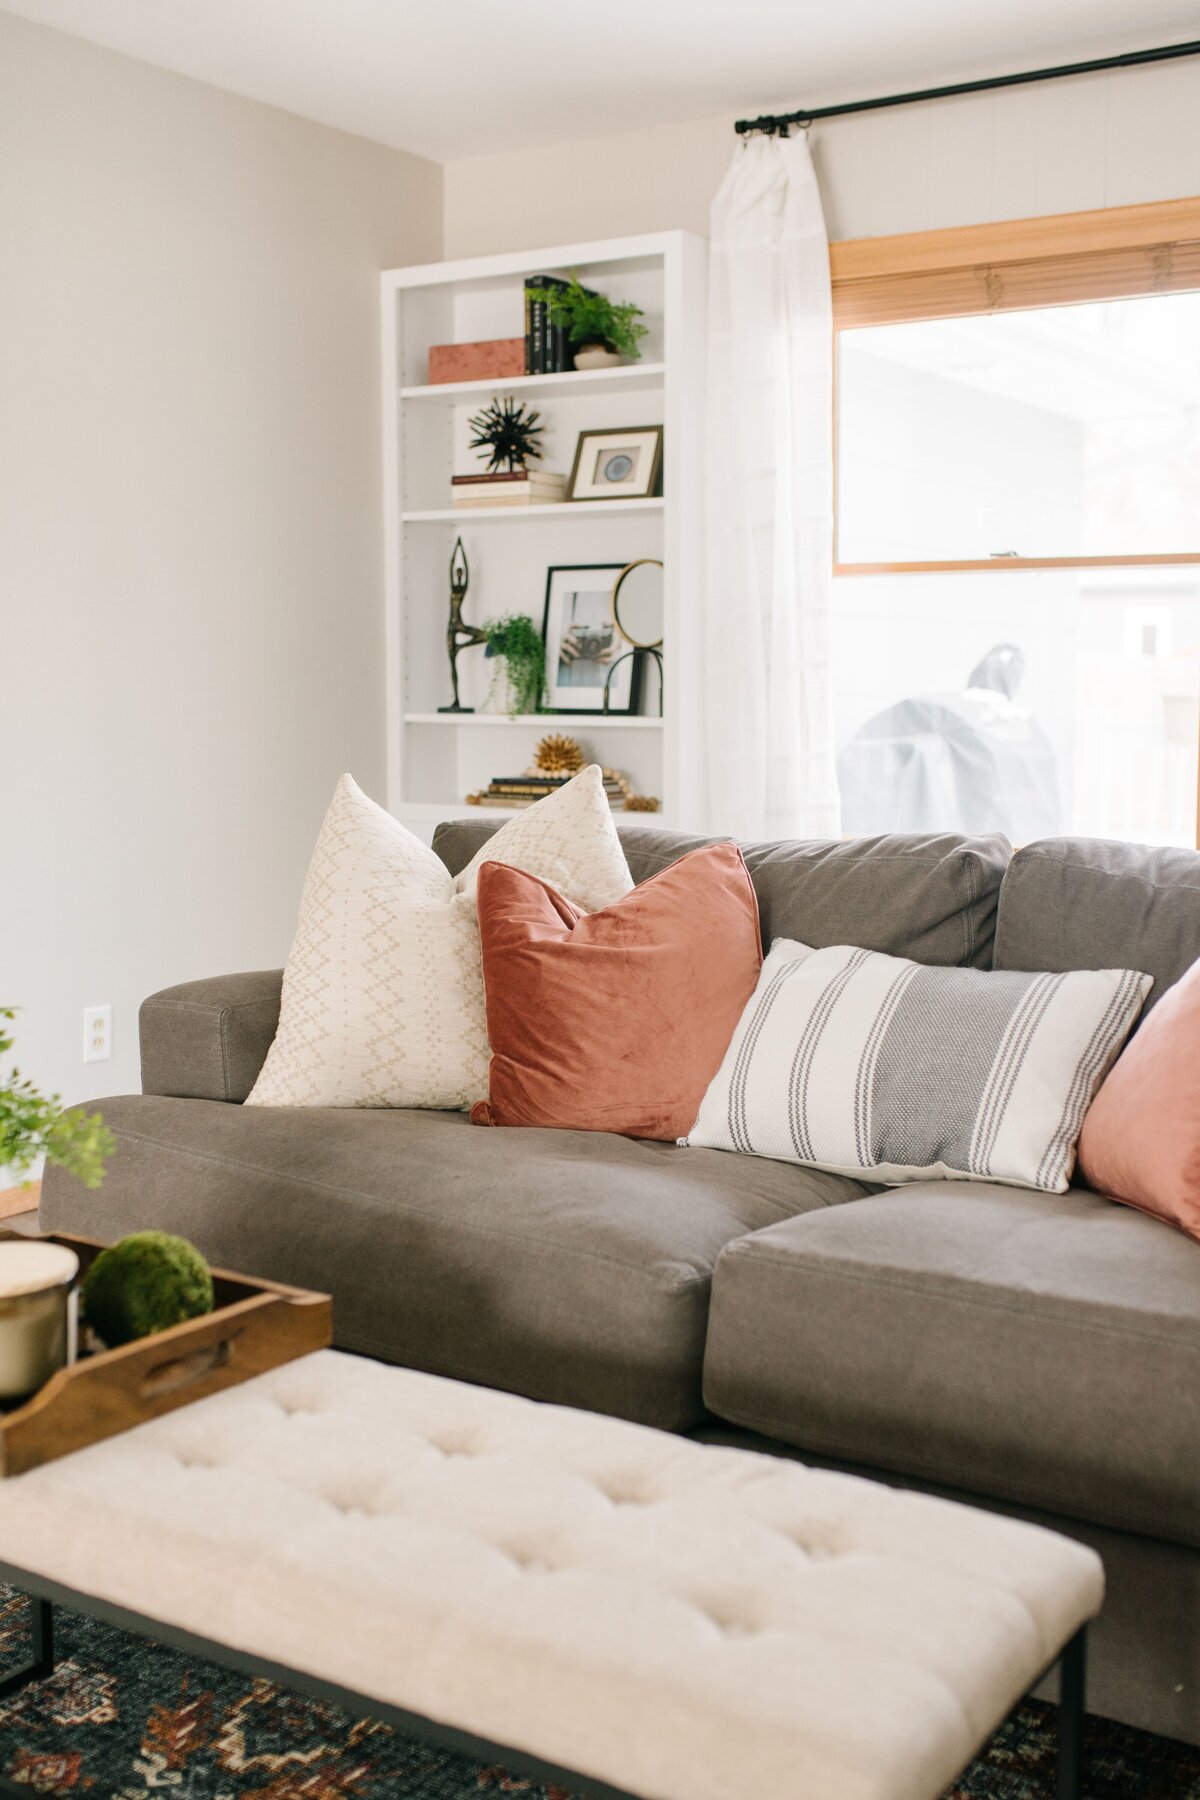 Pink and white pillows sit on a grey couch in a bright living room